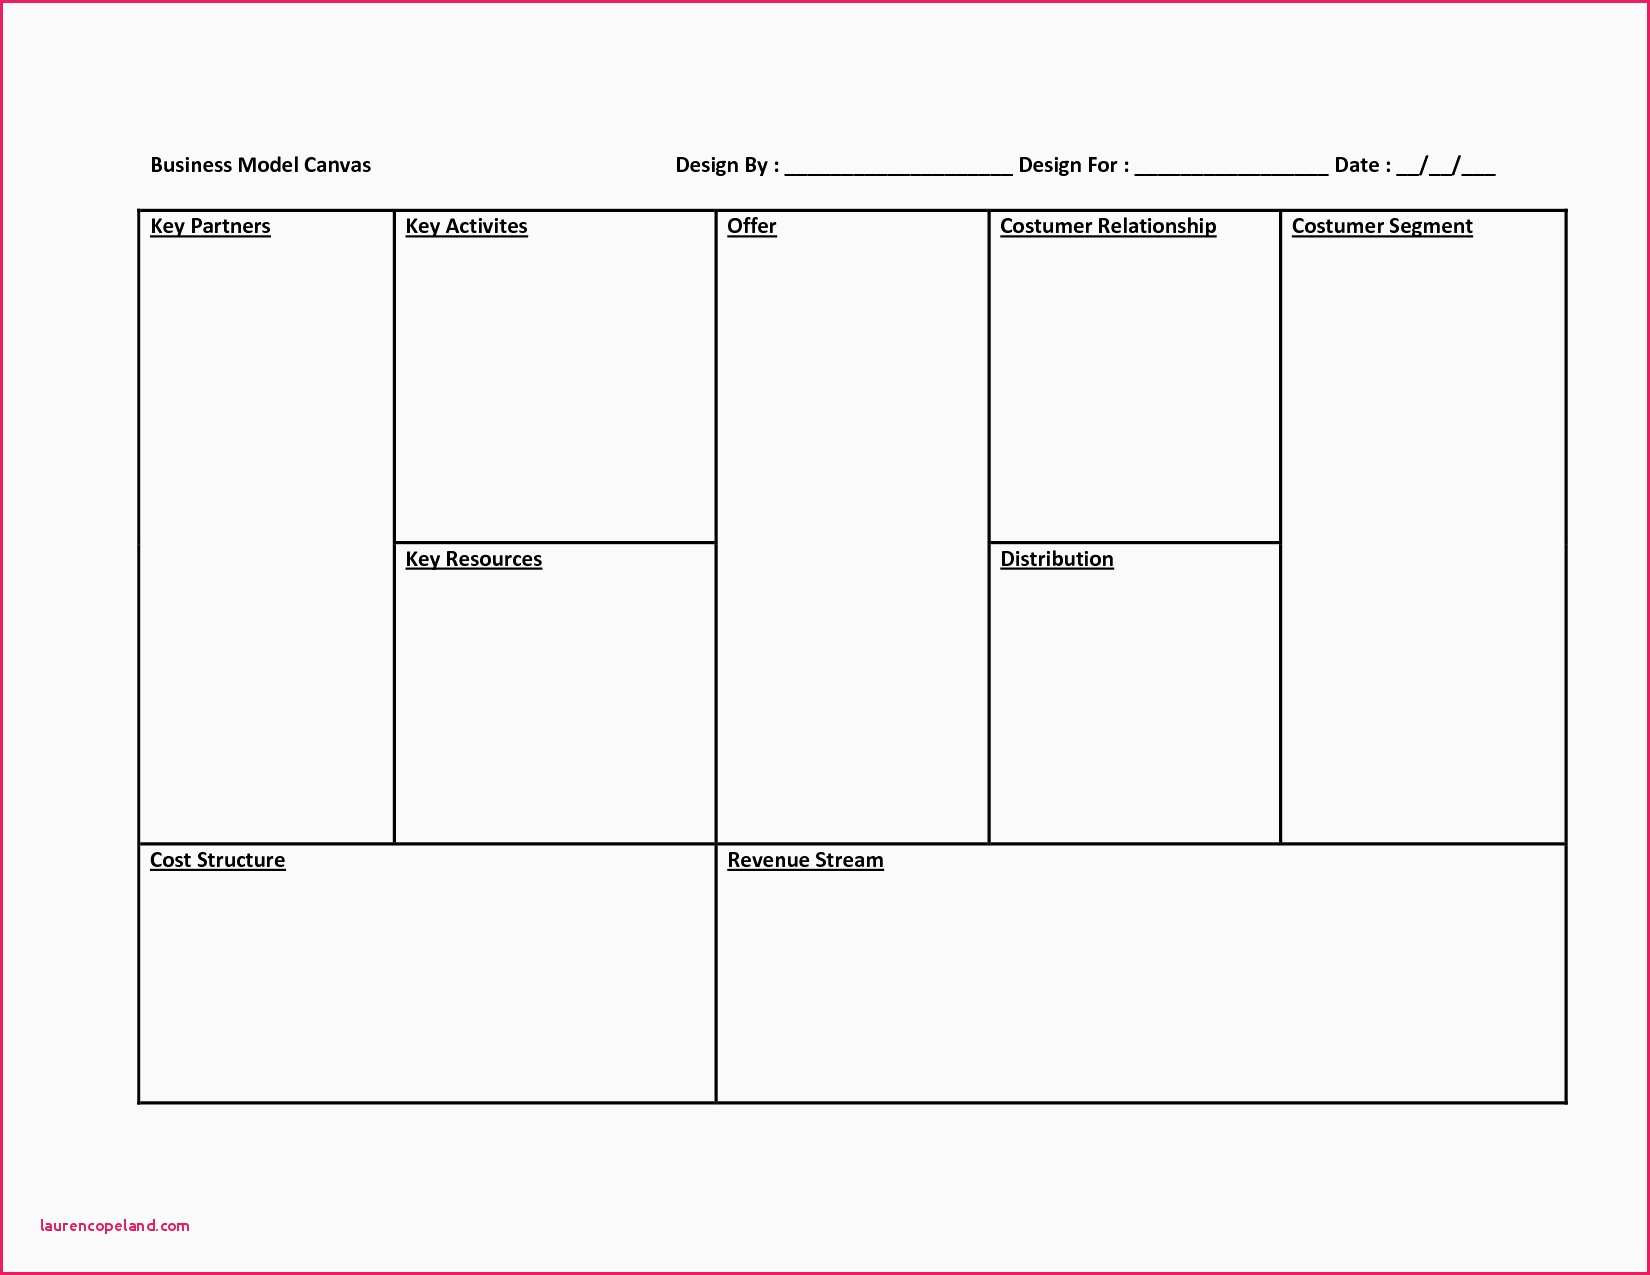 Business Model Canvas Template Word – Atlantaauctionco Regarding Business Canvas Word Template